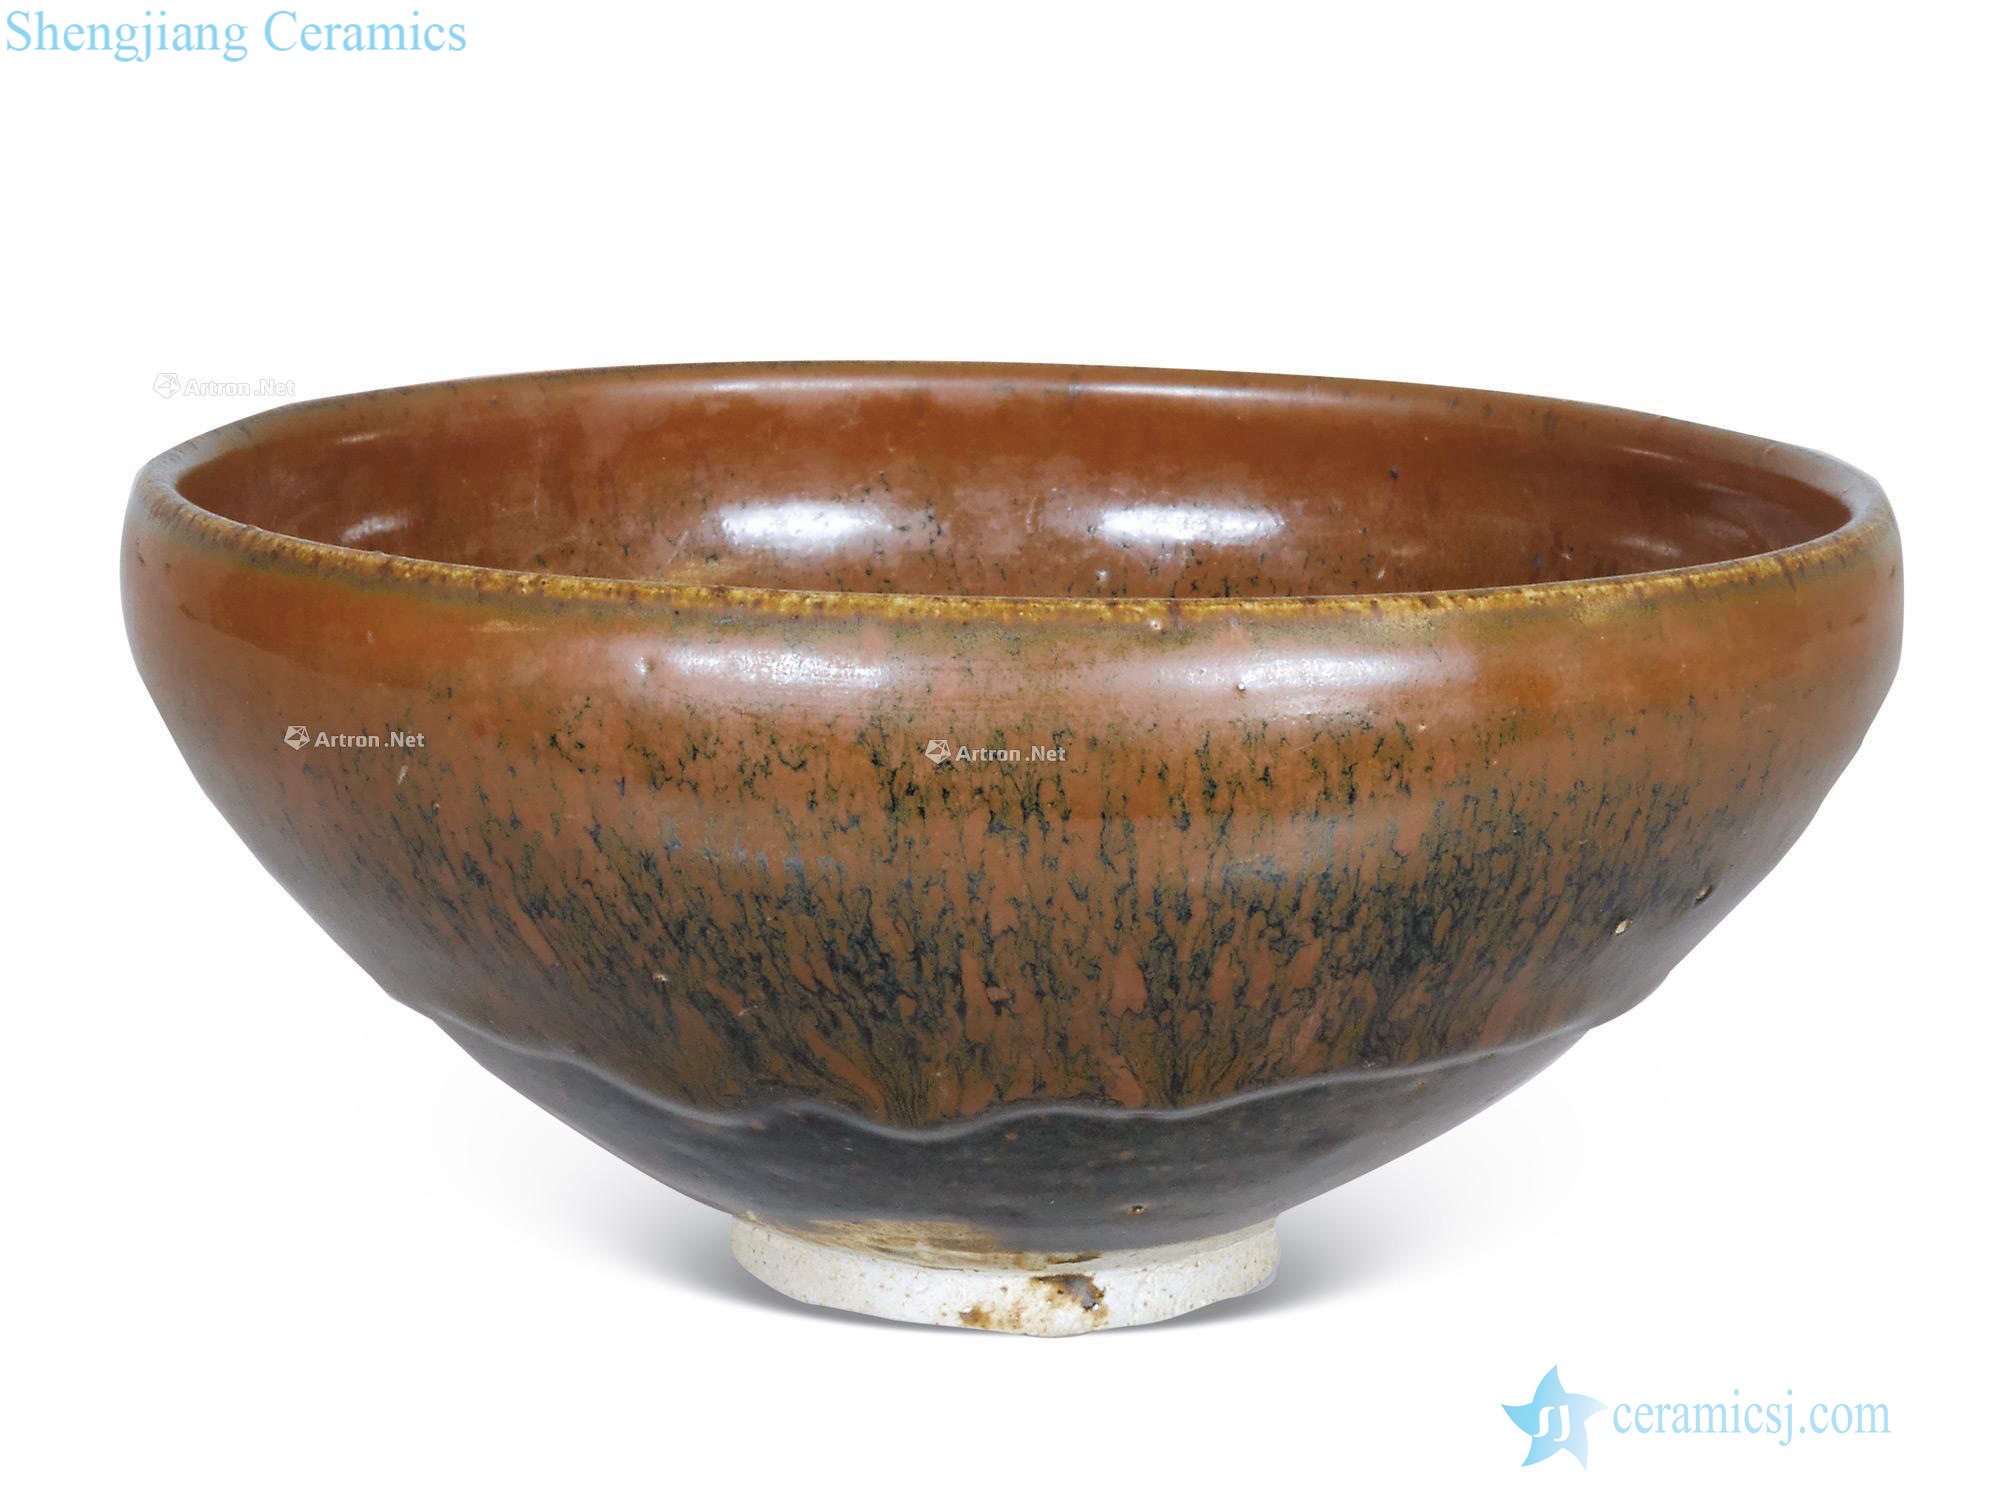 The song dynasty Yao state red glaze TuHao 盌